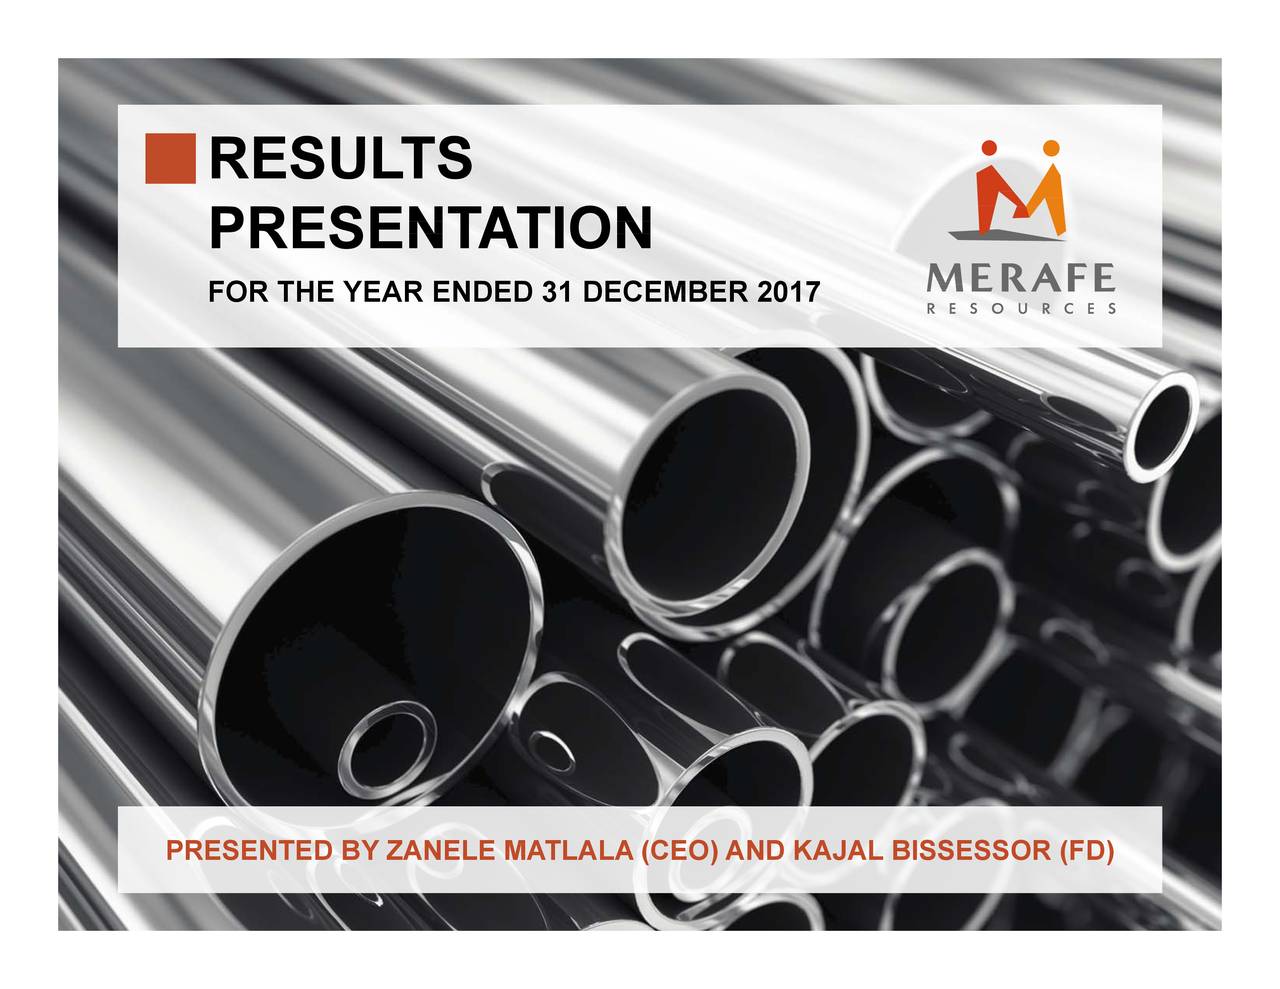 | Results presentation for the year ended 31 December 2017